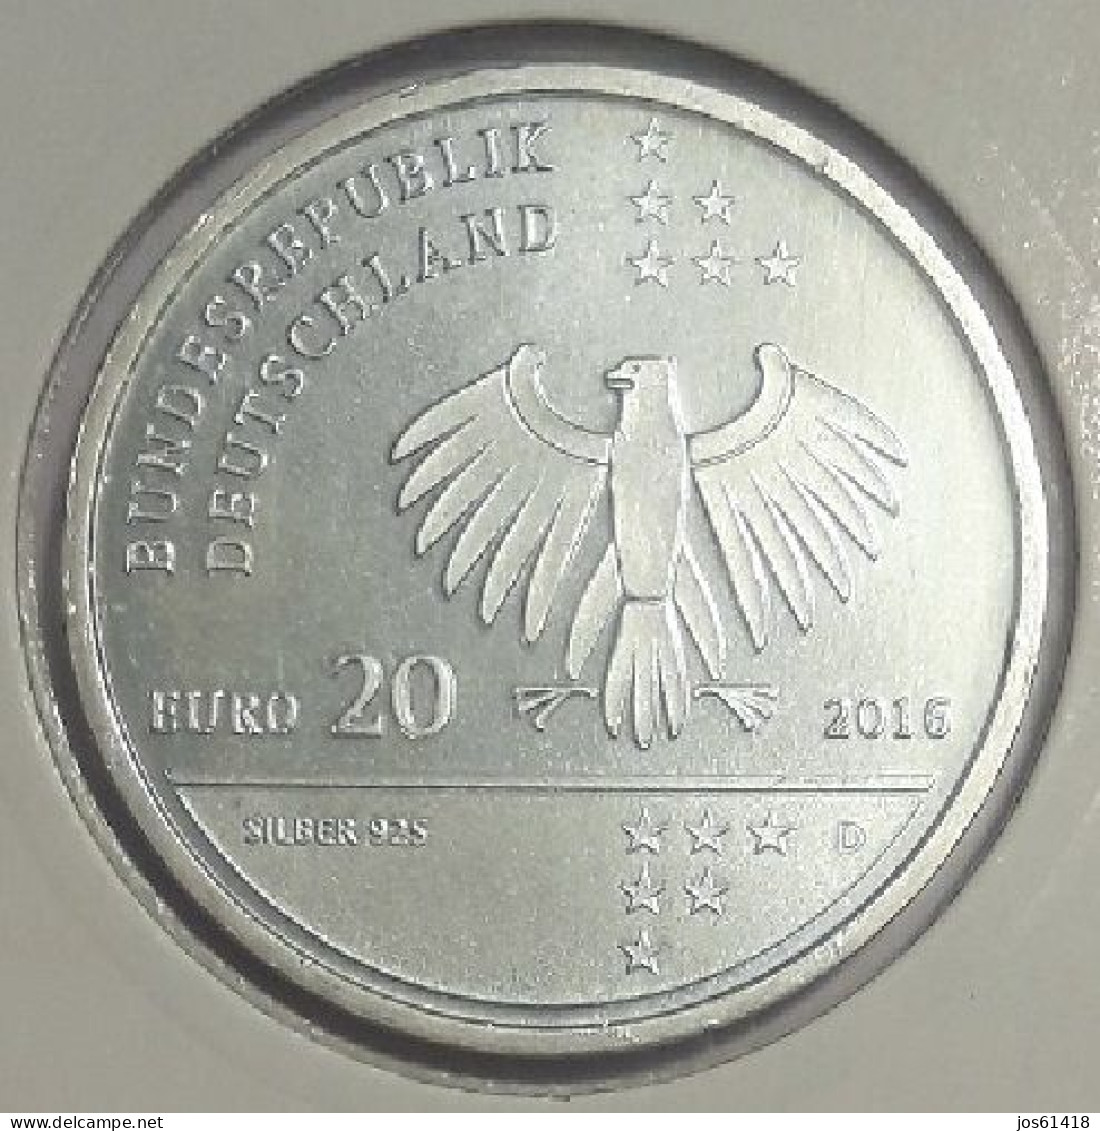 20 Euros Alemania / Germany   2016 200 Aniversrio Ernst Litfass  D  Plata - Germany